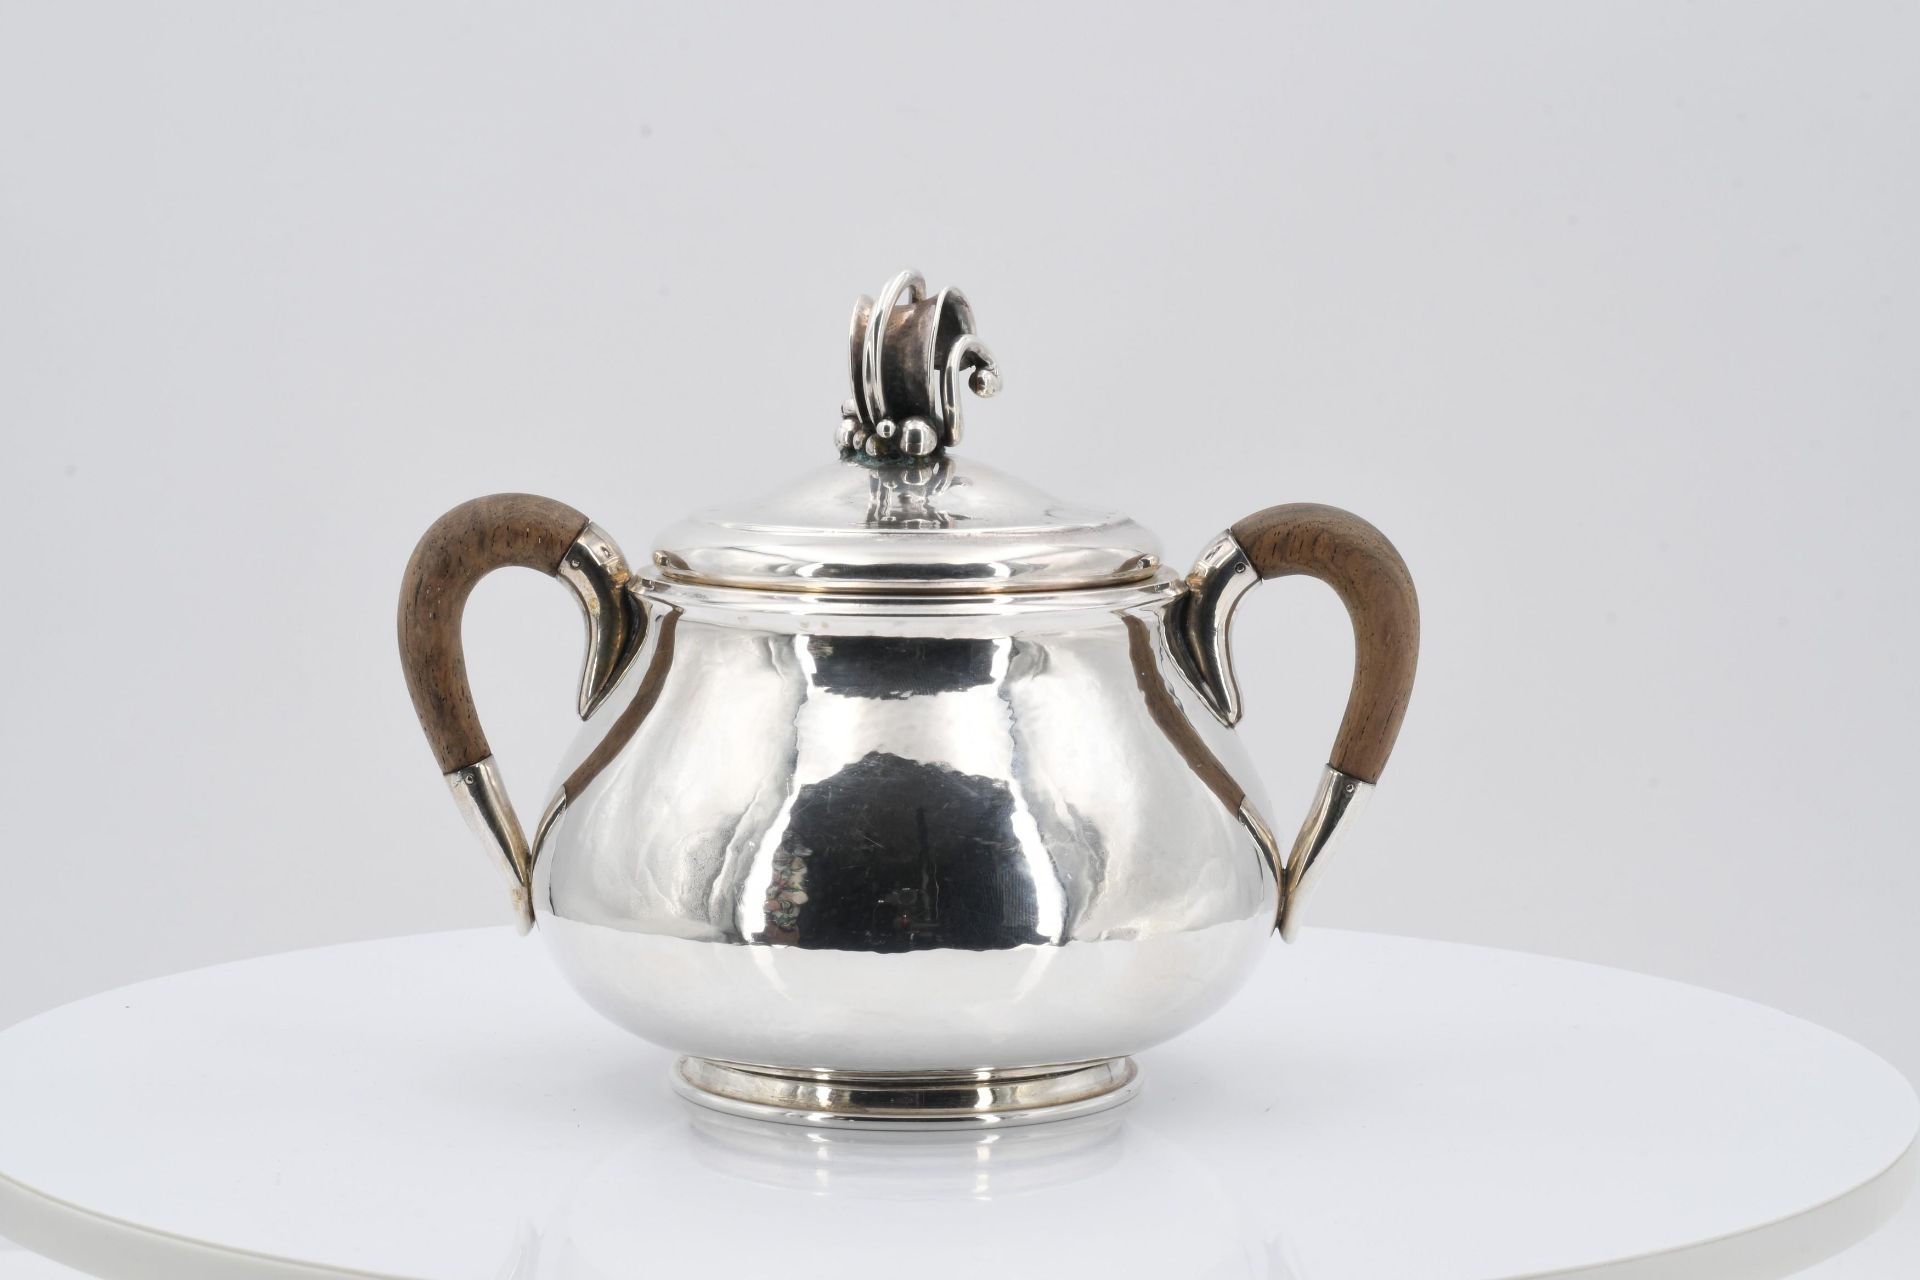 Coffee set with martellé surface and vegetal knobs - Image 10 of 21